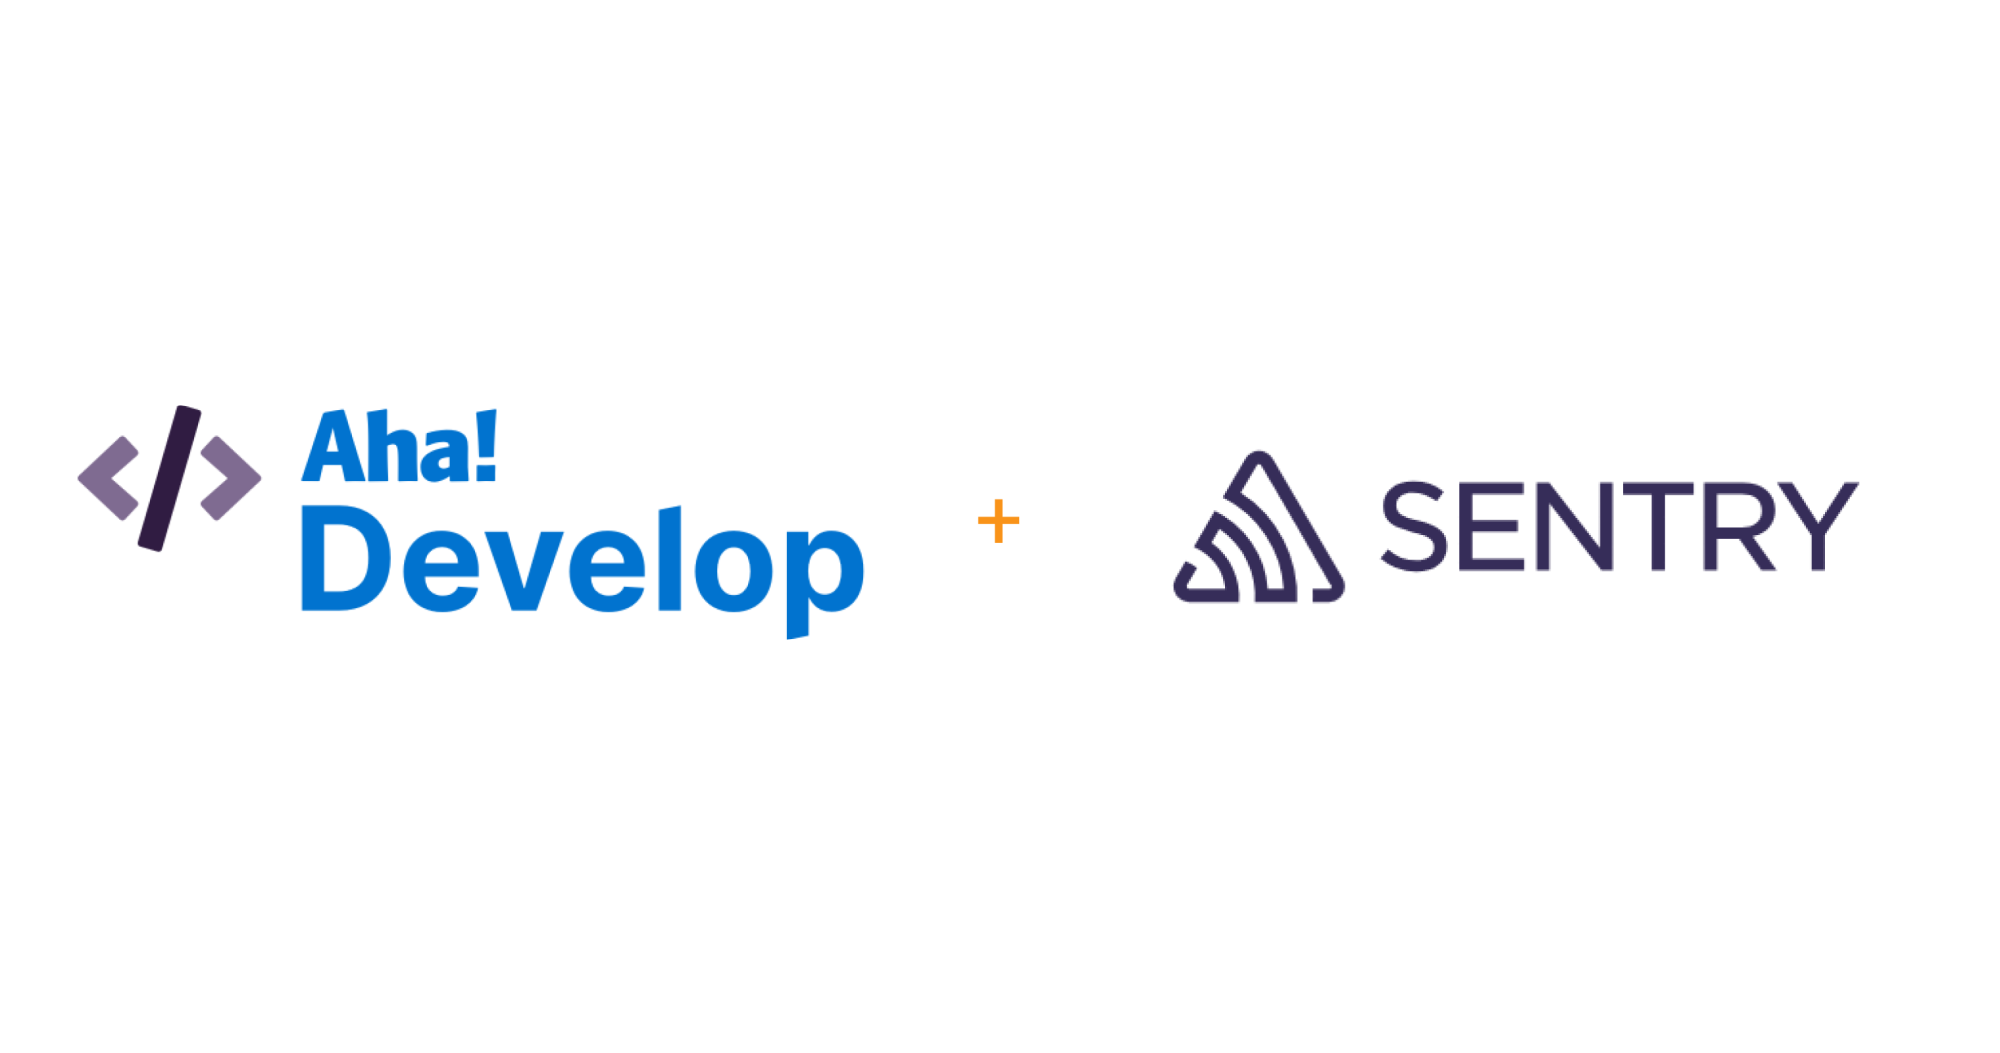 Hero image for the Aha! Develop Sentry integration go-to-market.